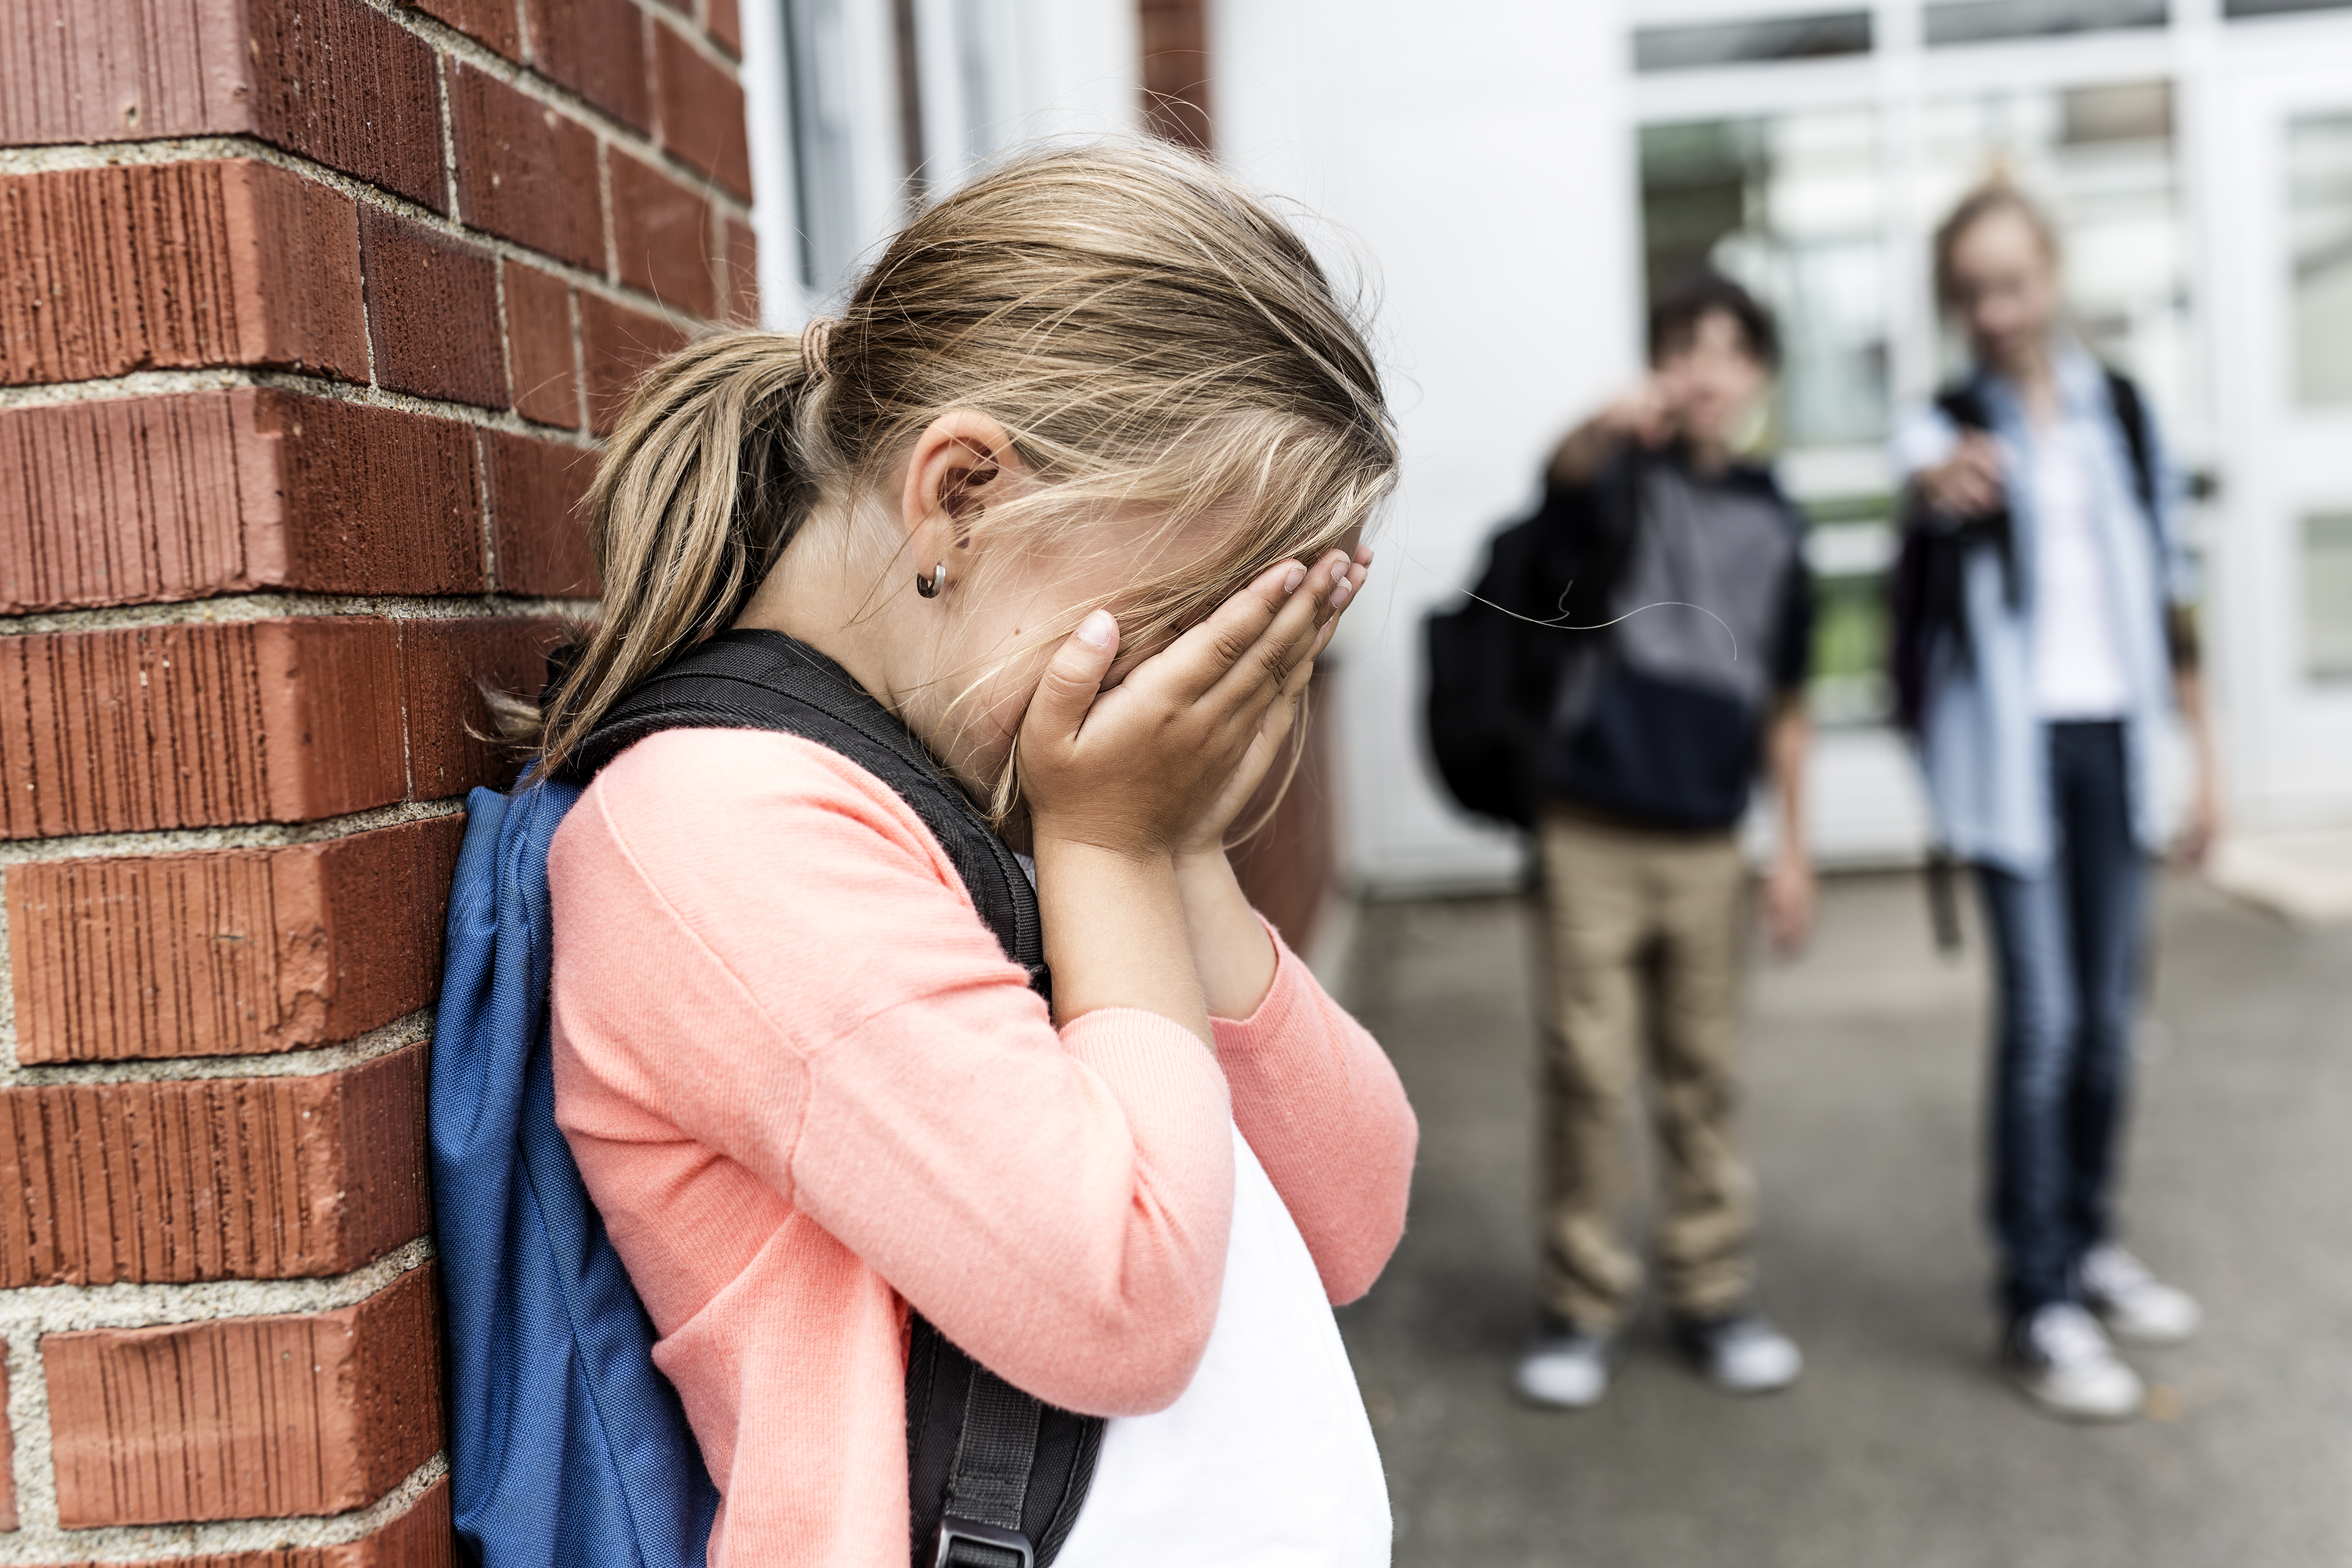 A girl crying in the school hallway | Source: Shutterstock